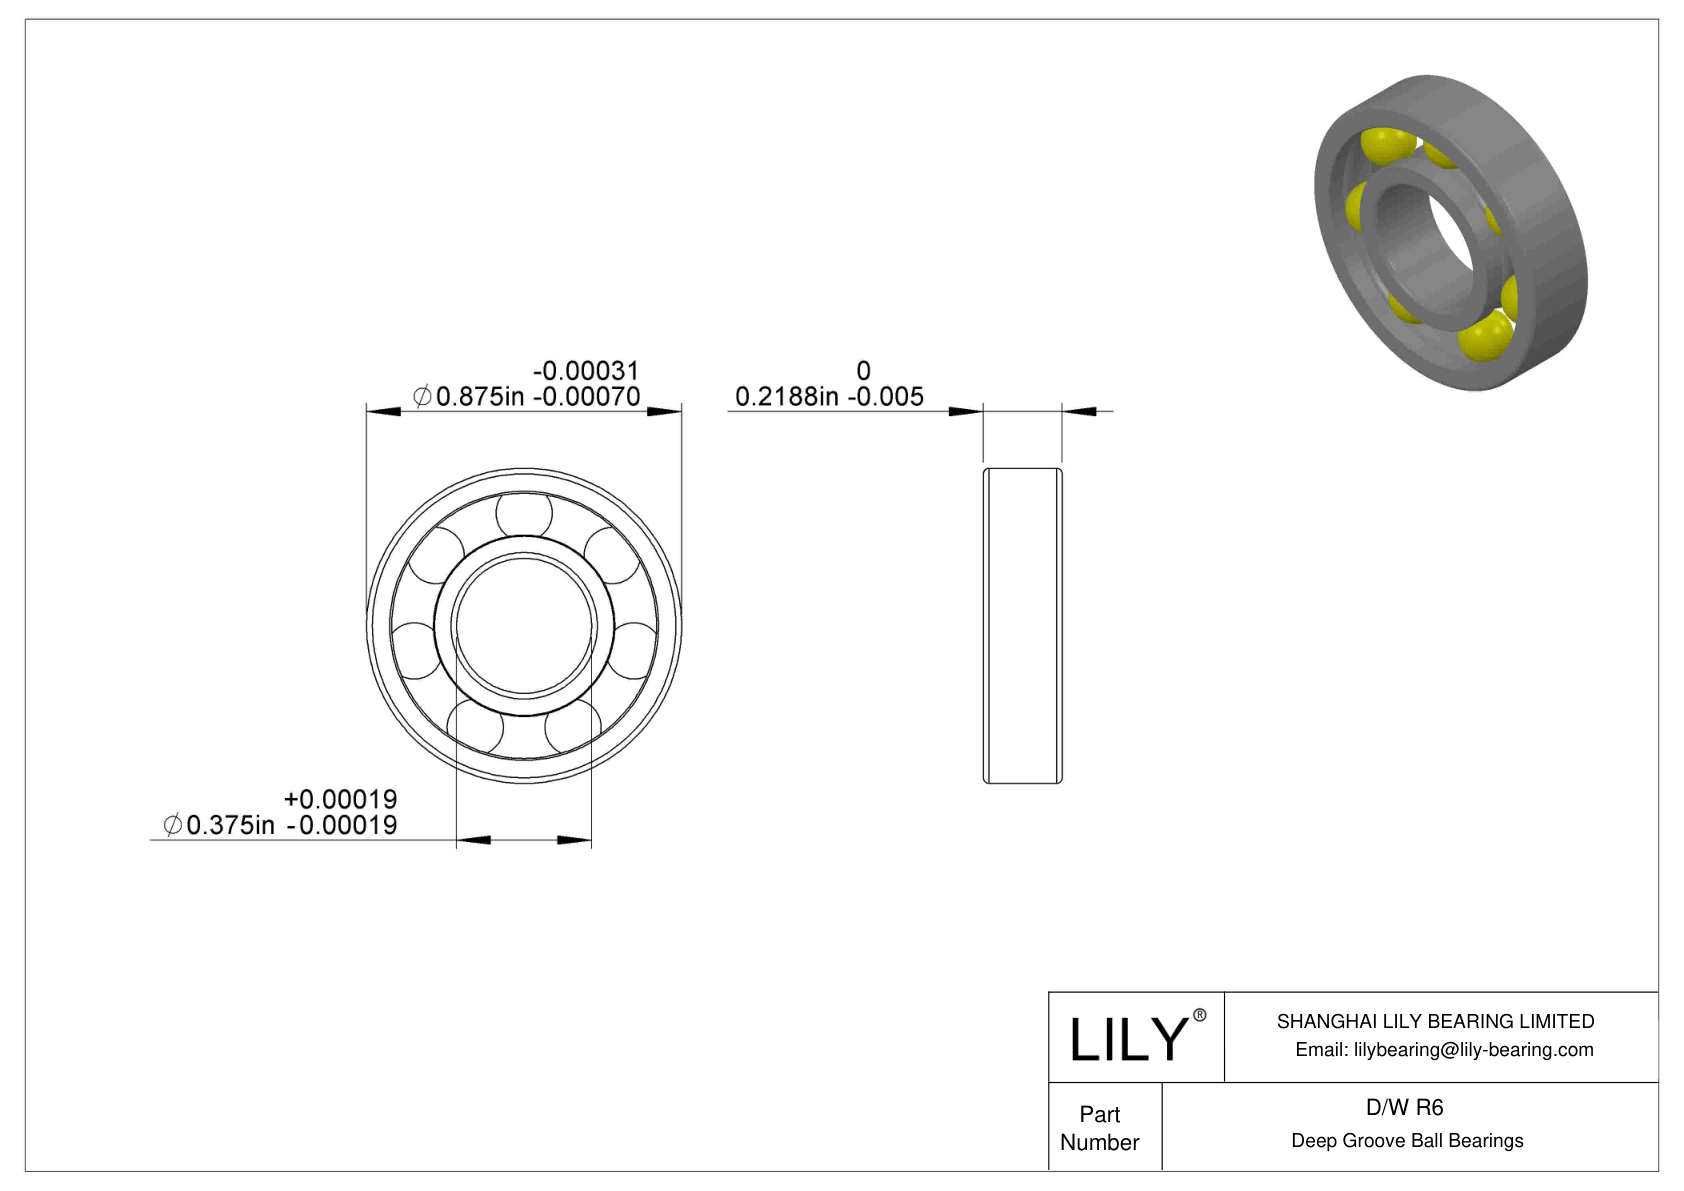 D/W R6 Stainless Steel Deep Groove Ball Bearings cad drawing